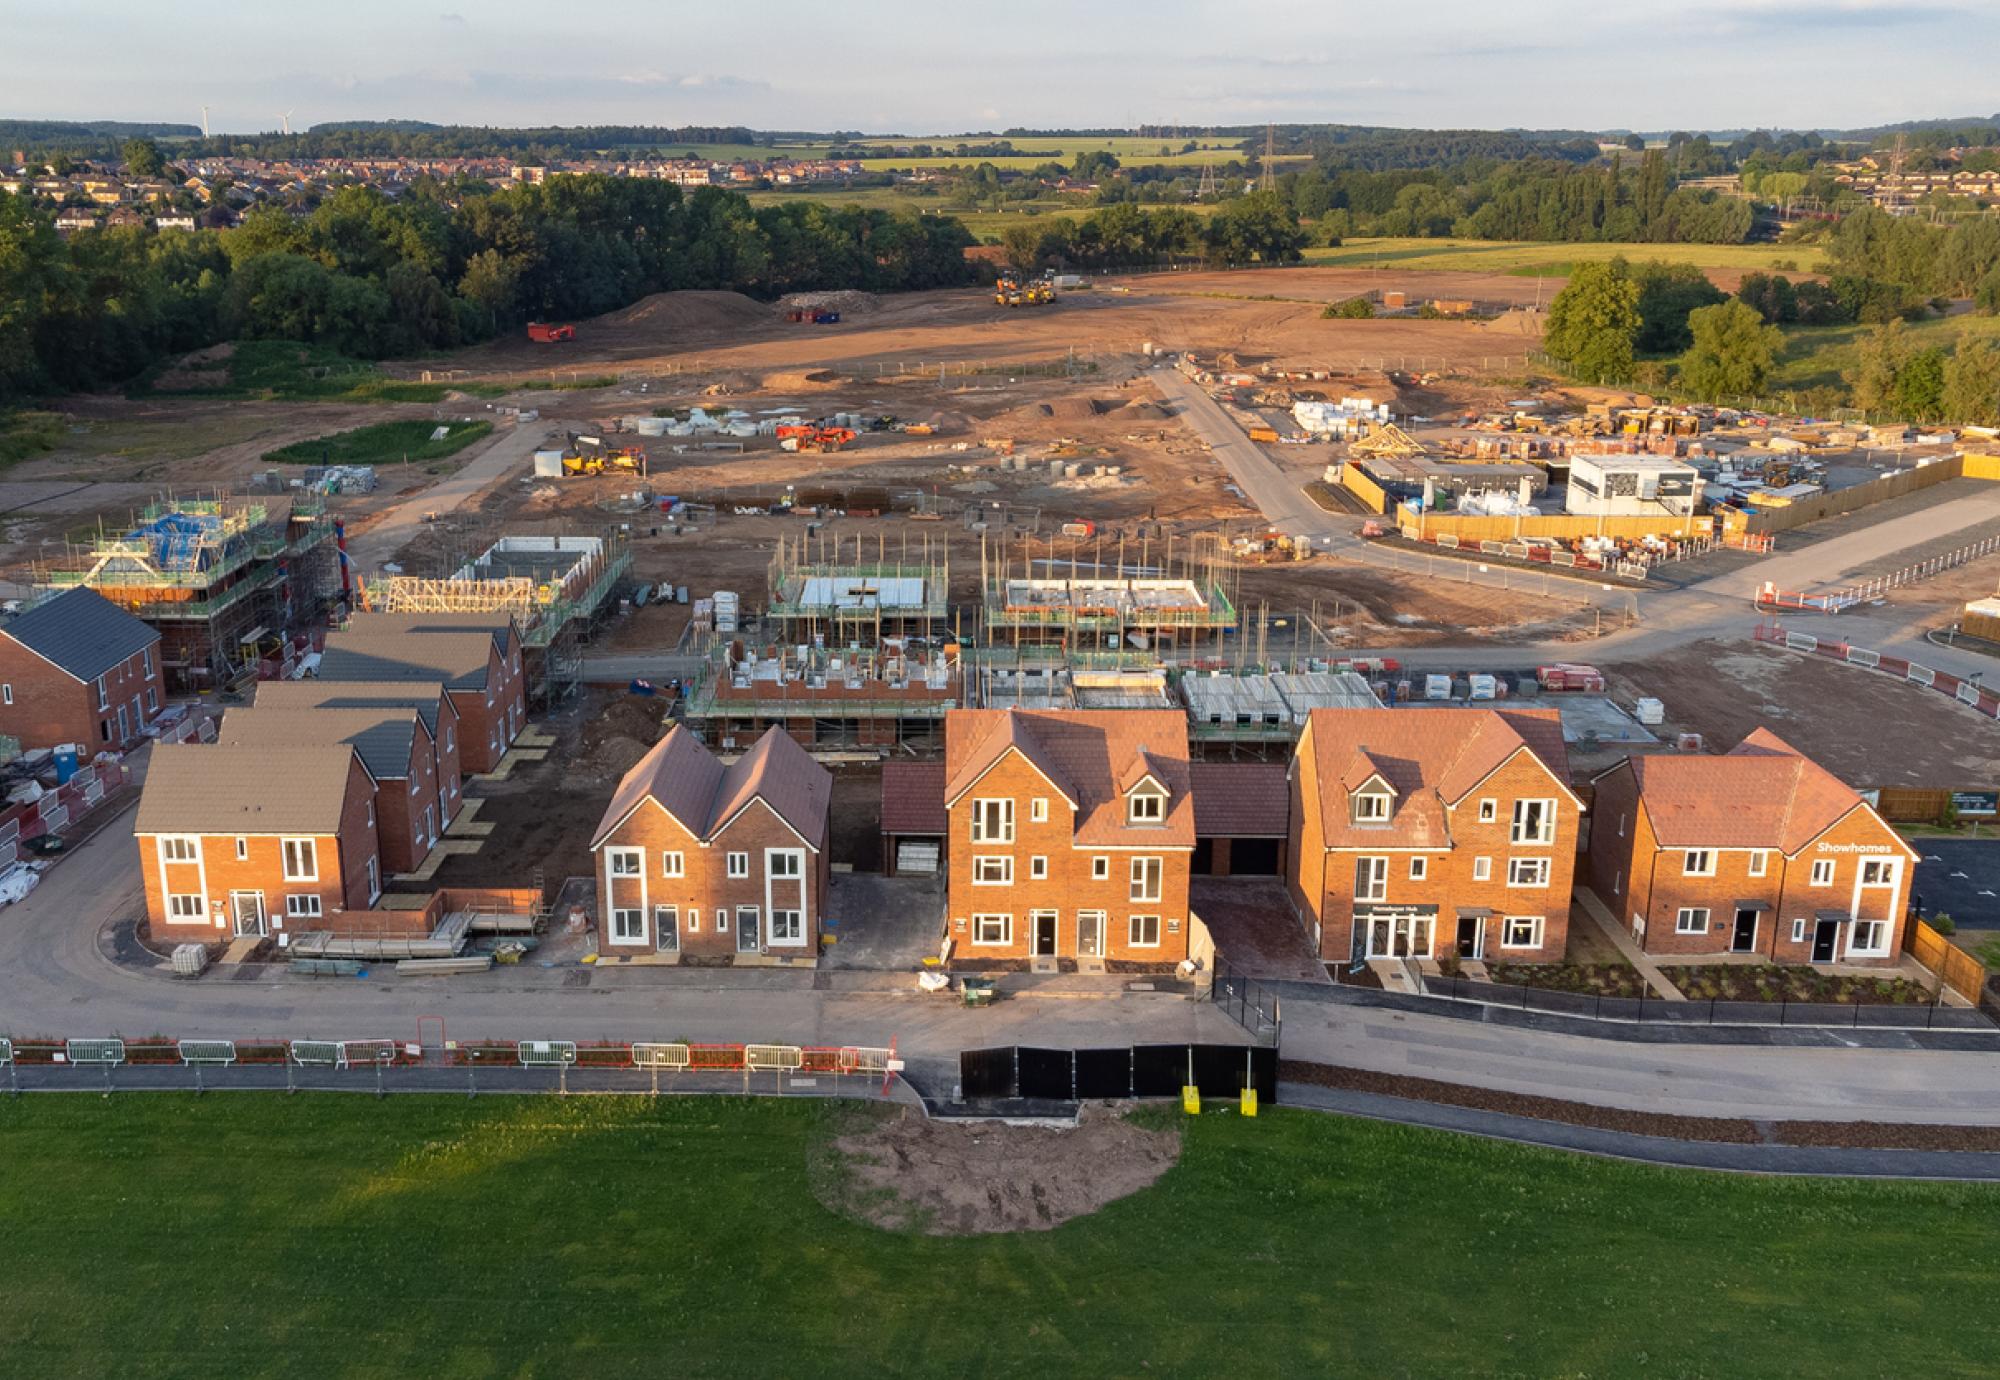 Aerial view looking down on new build housing construction site in England, UK